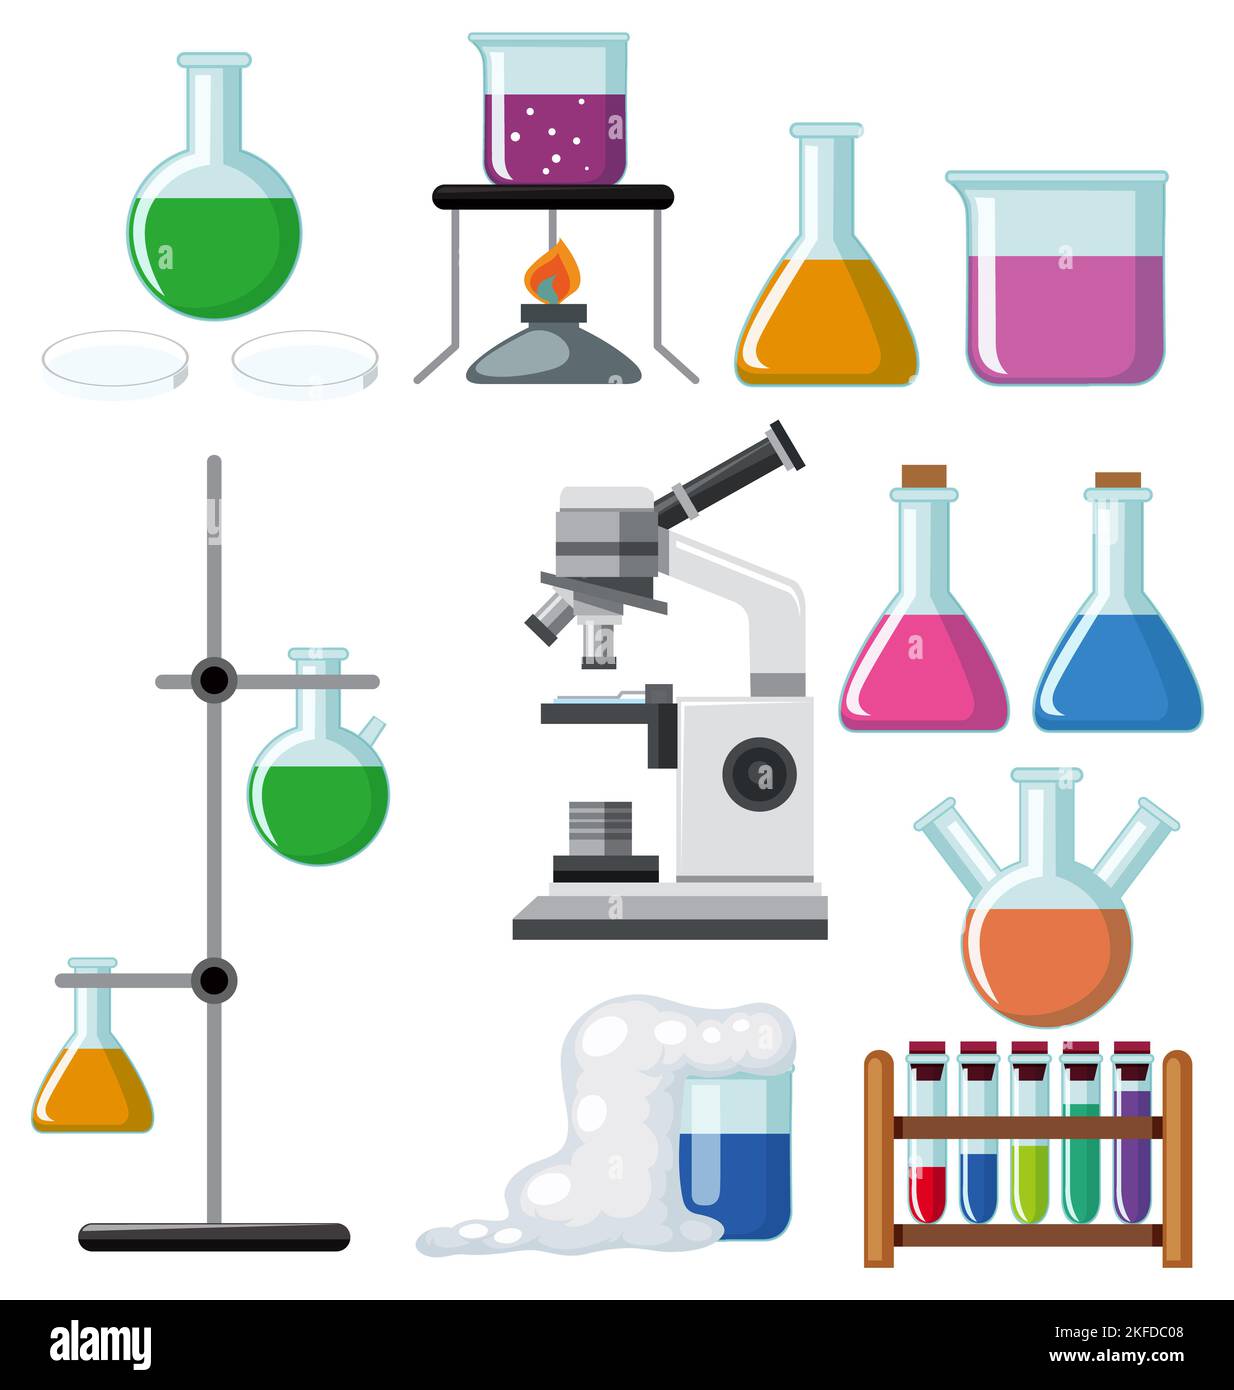 Chemical laboratory science chemical objects illustration Stock Photo ...